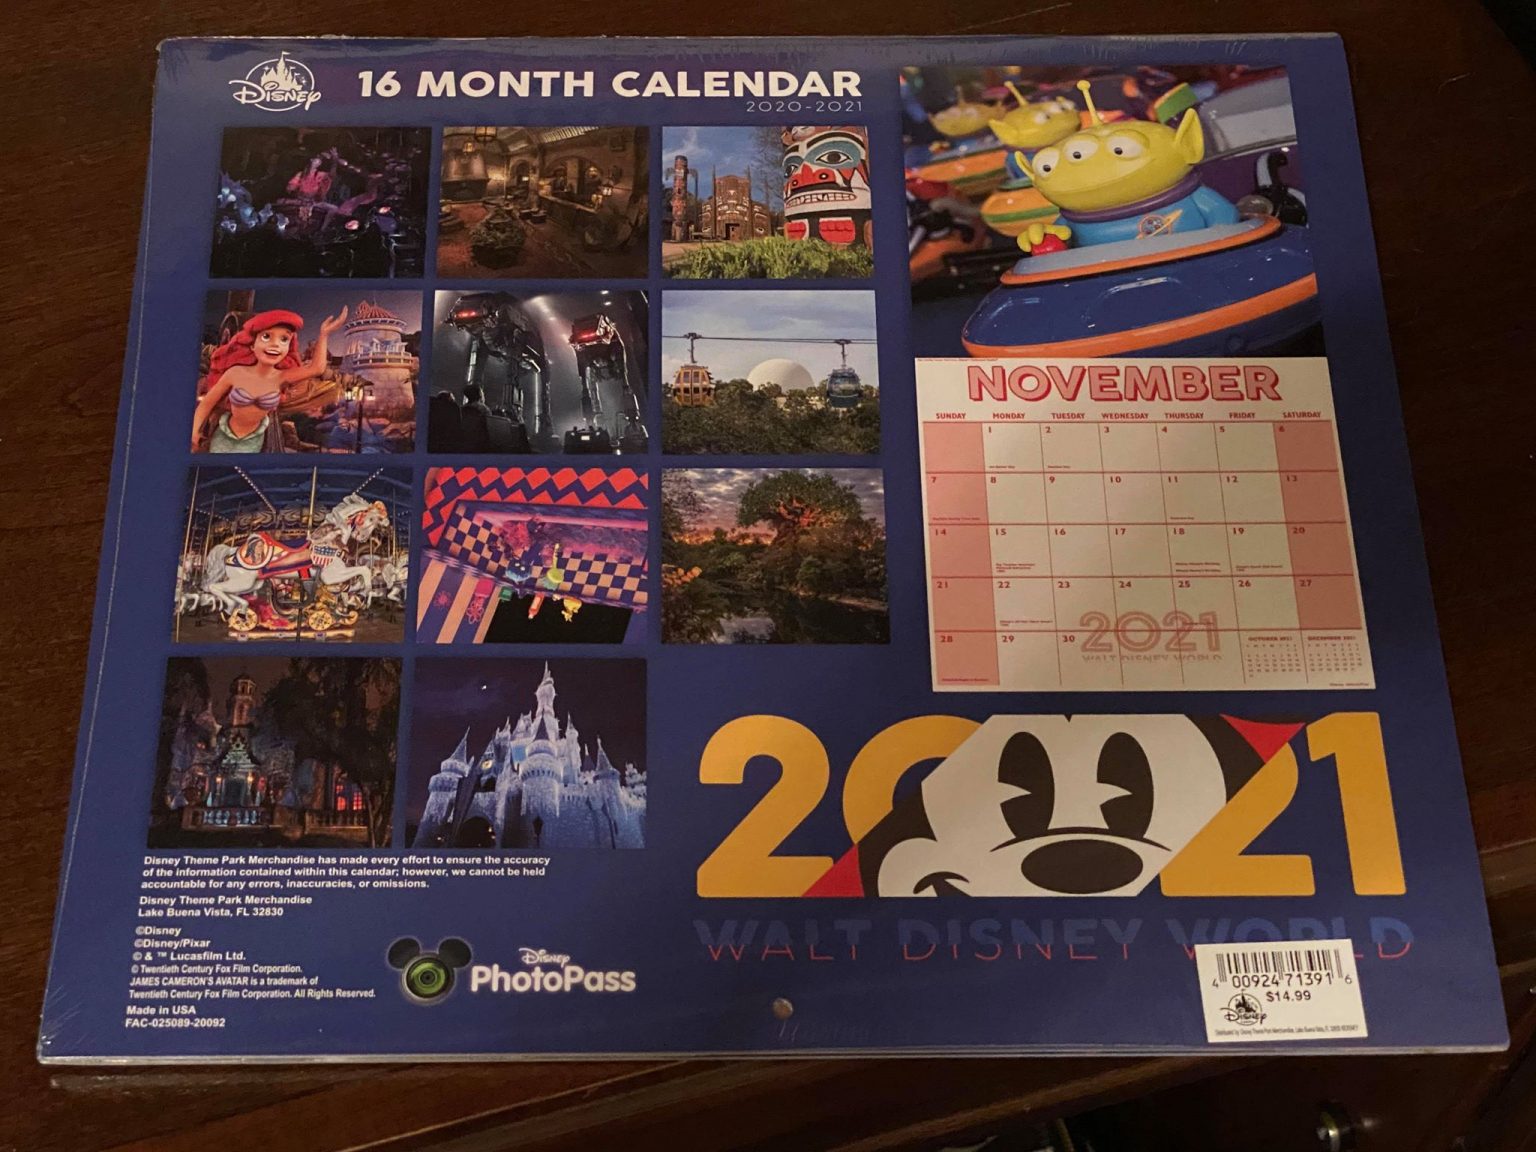 plan-ahead-for-2021-with-these-disney-parks-calendars-disney-fashion-blog